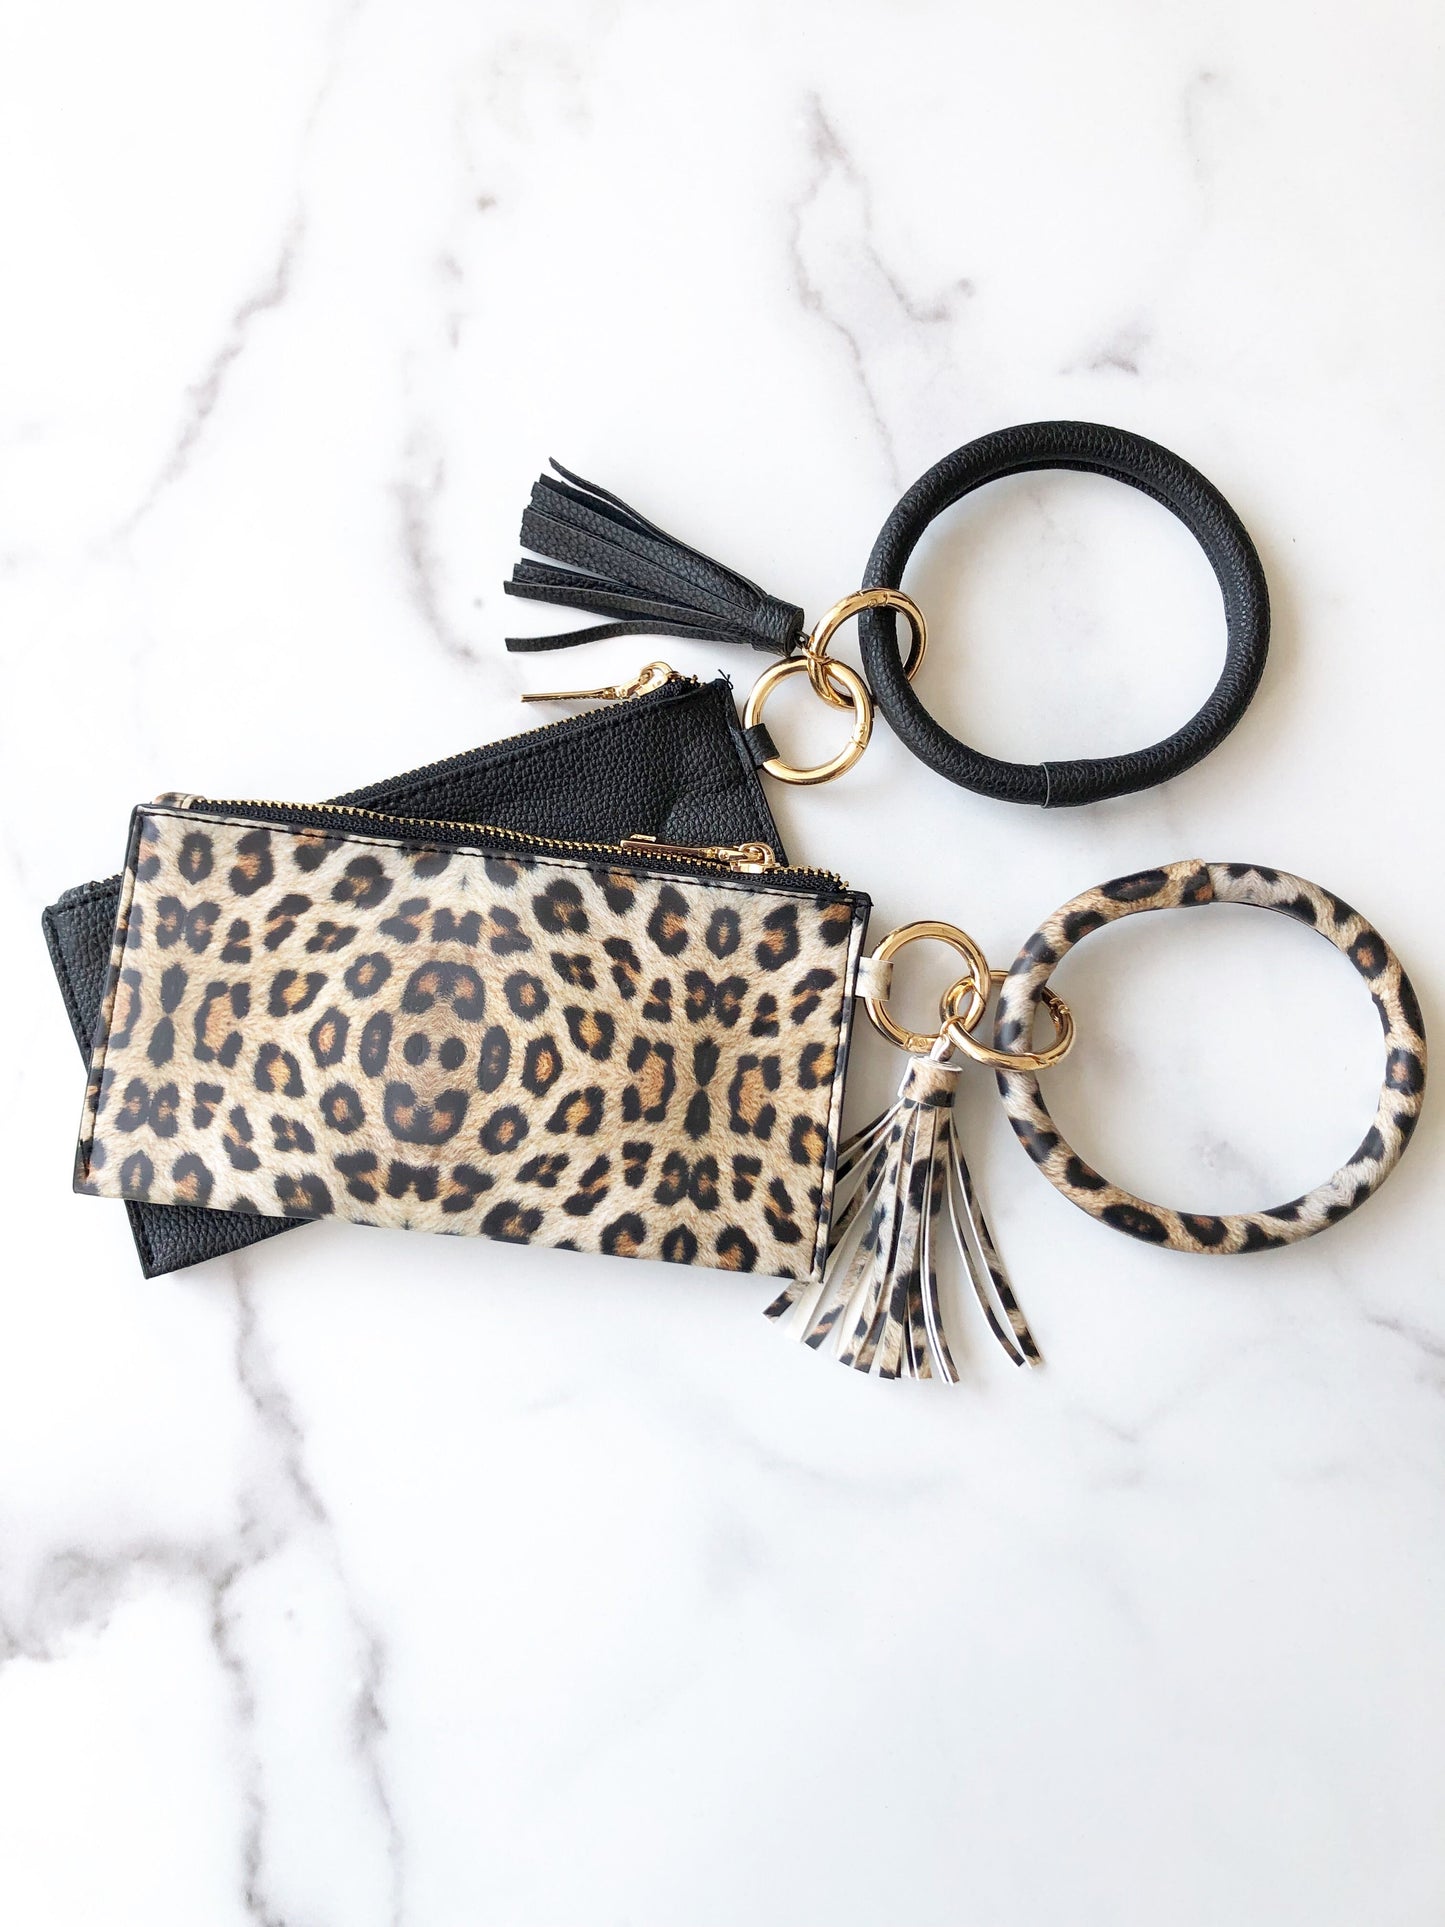 Jenny Hands Free Bangle Keychain with Tassel and Wristlet-Black Marble